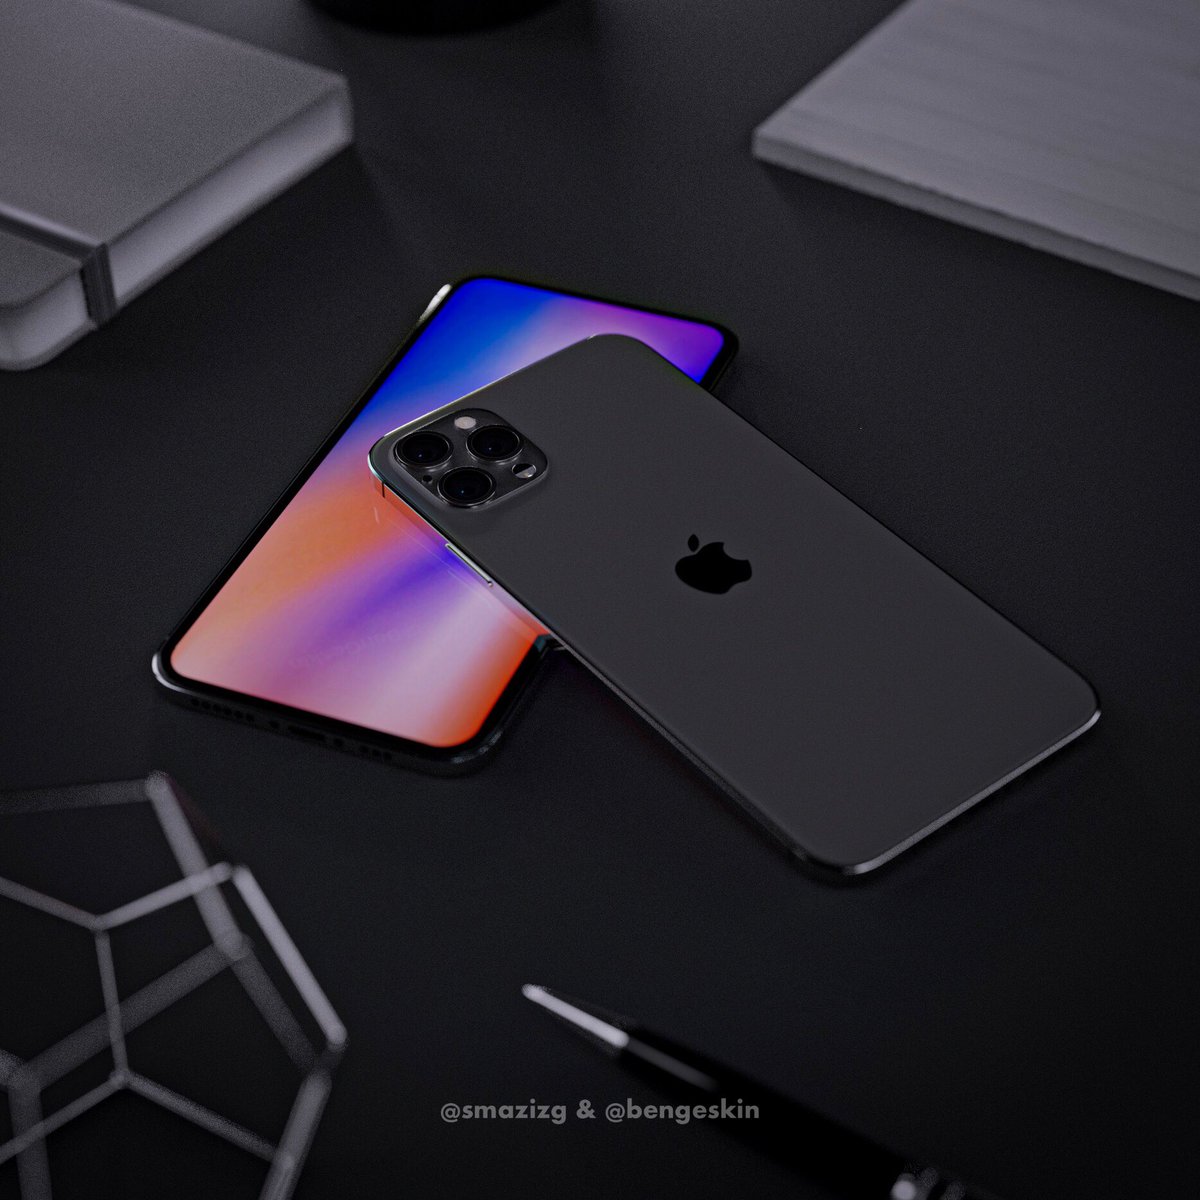 Ben Geskin On Twitter Here S More 2020 Iphone 12 Pro Concept